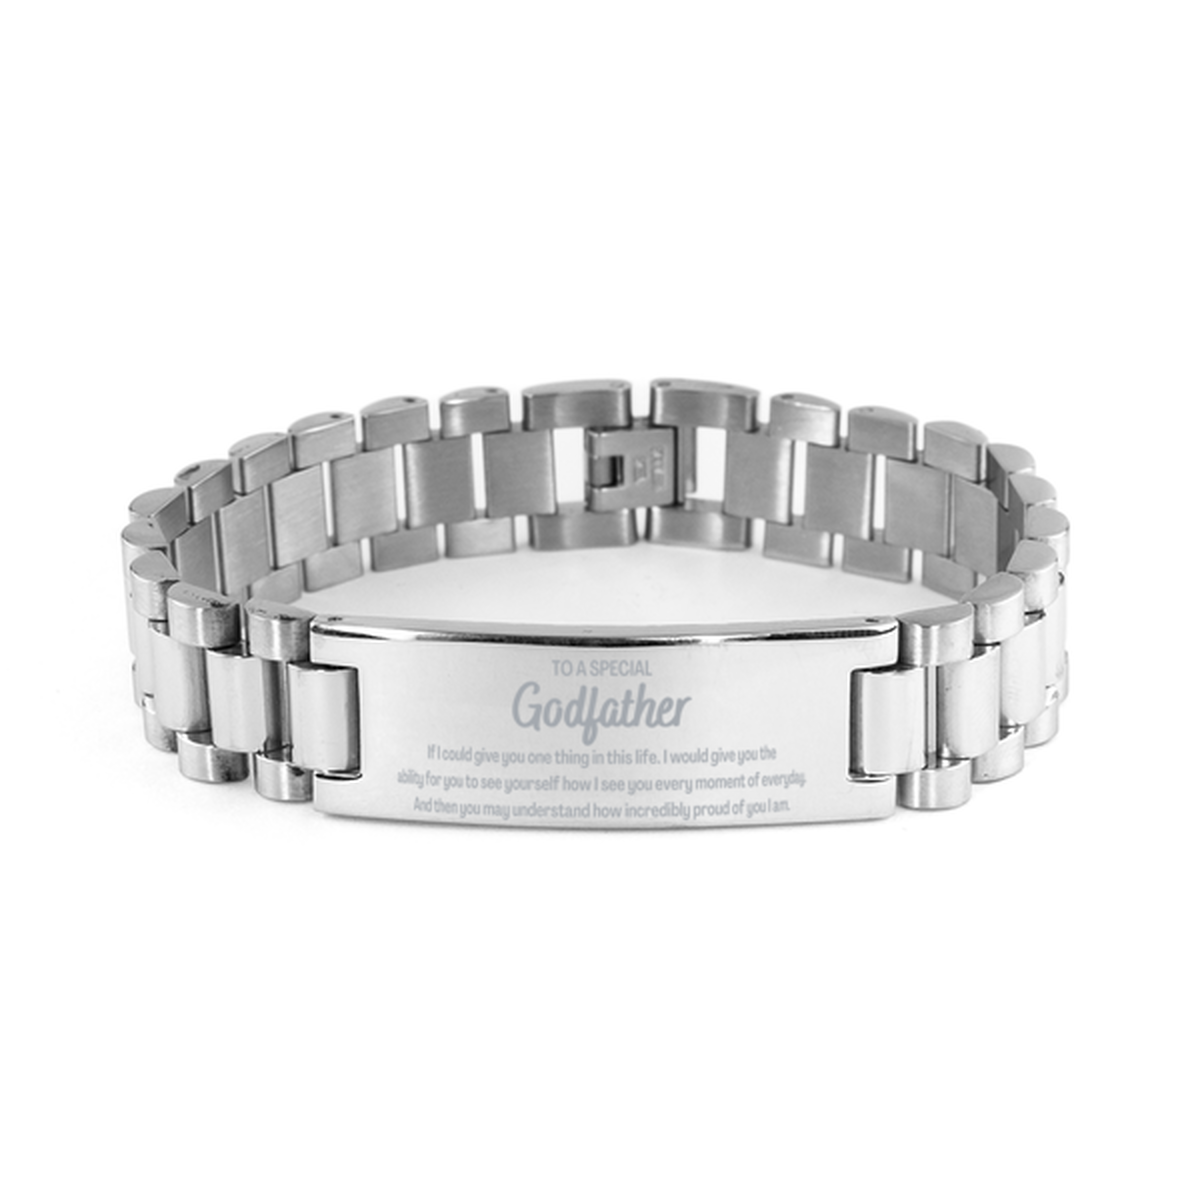 To My Godfather Ladder Stainless Steel Bracelet, Gifts For Godfather Engraved, Inspirational Gifts for Christmas Birthday, Epic Gifts for Godfather To A Special Godfather how incredibly proud of you I am